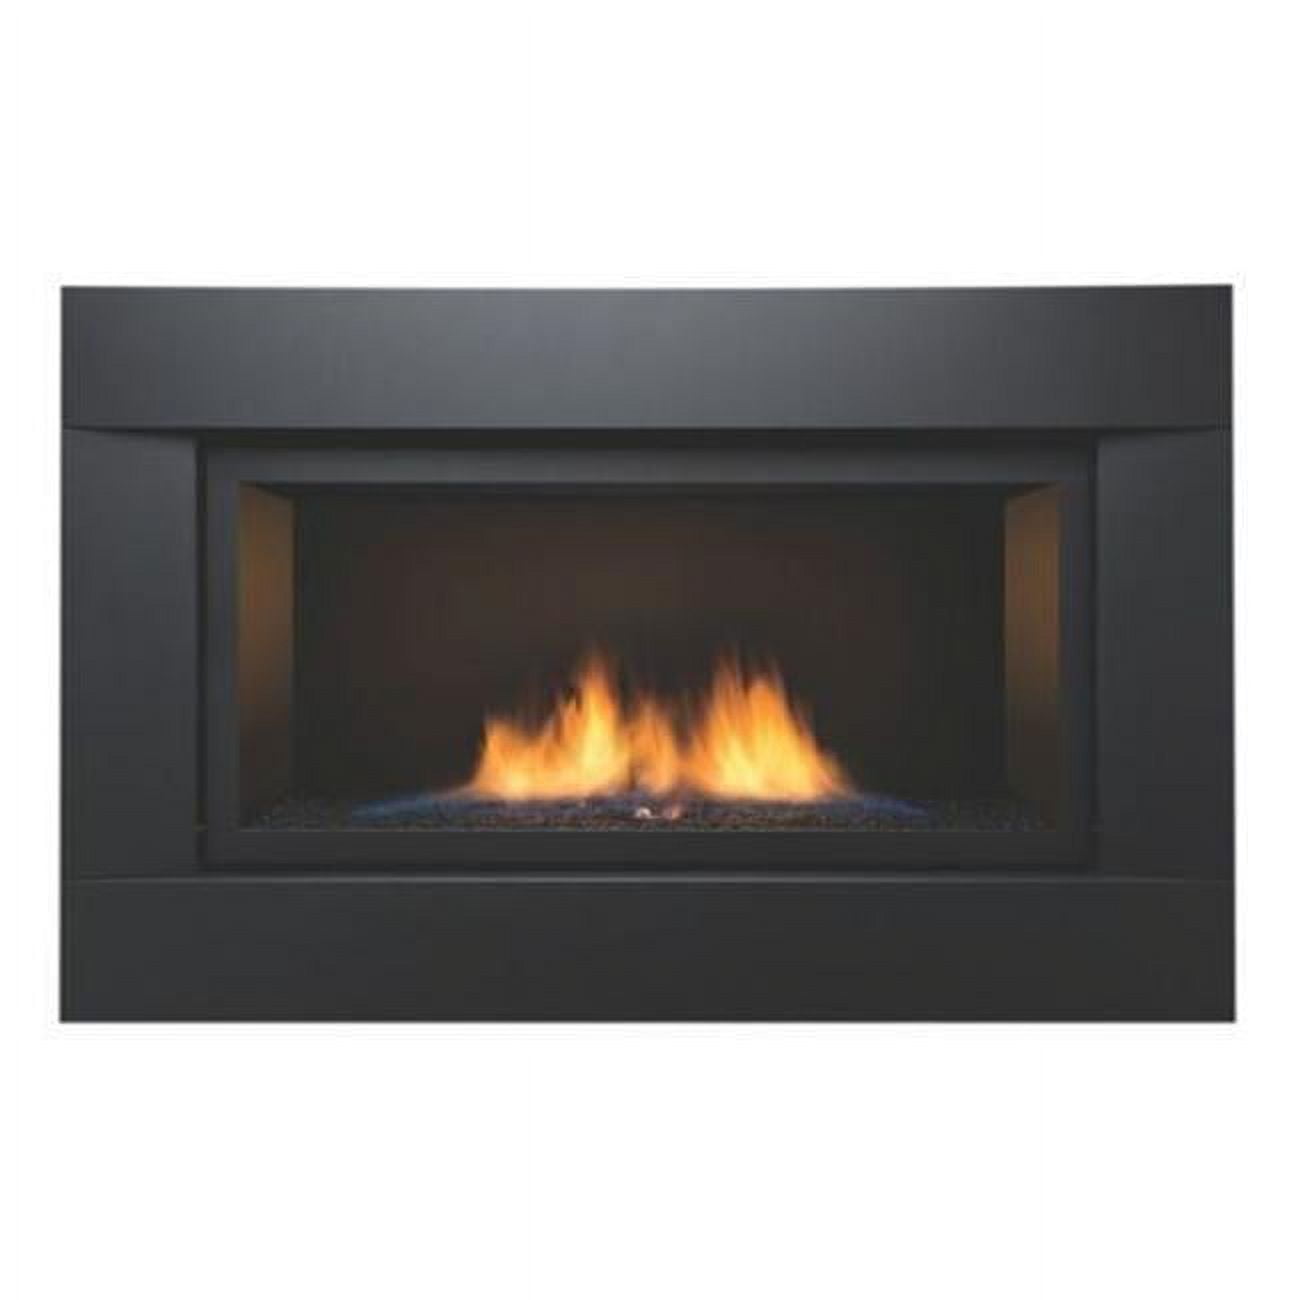 Palisade-36-ng 36 In. See-thru Palisade Linear Direct Vent Gas Fireplace - Natural Gas